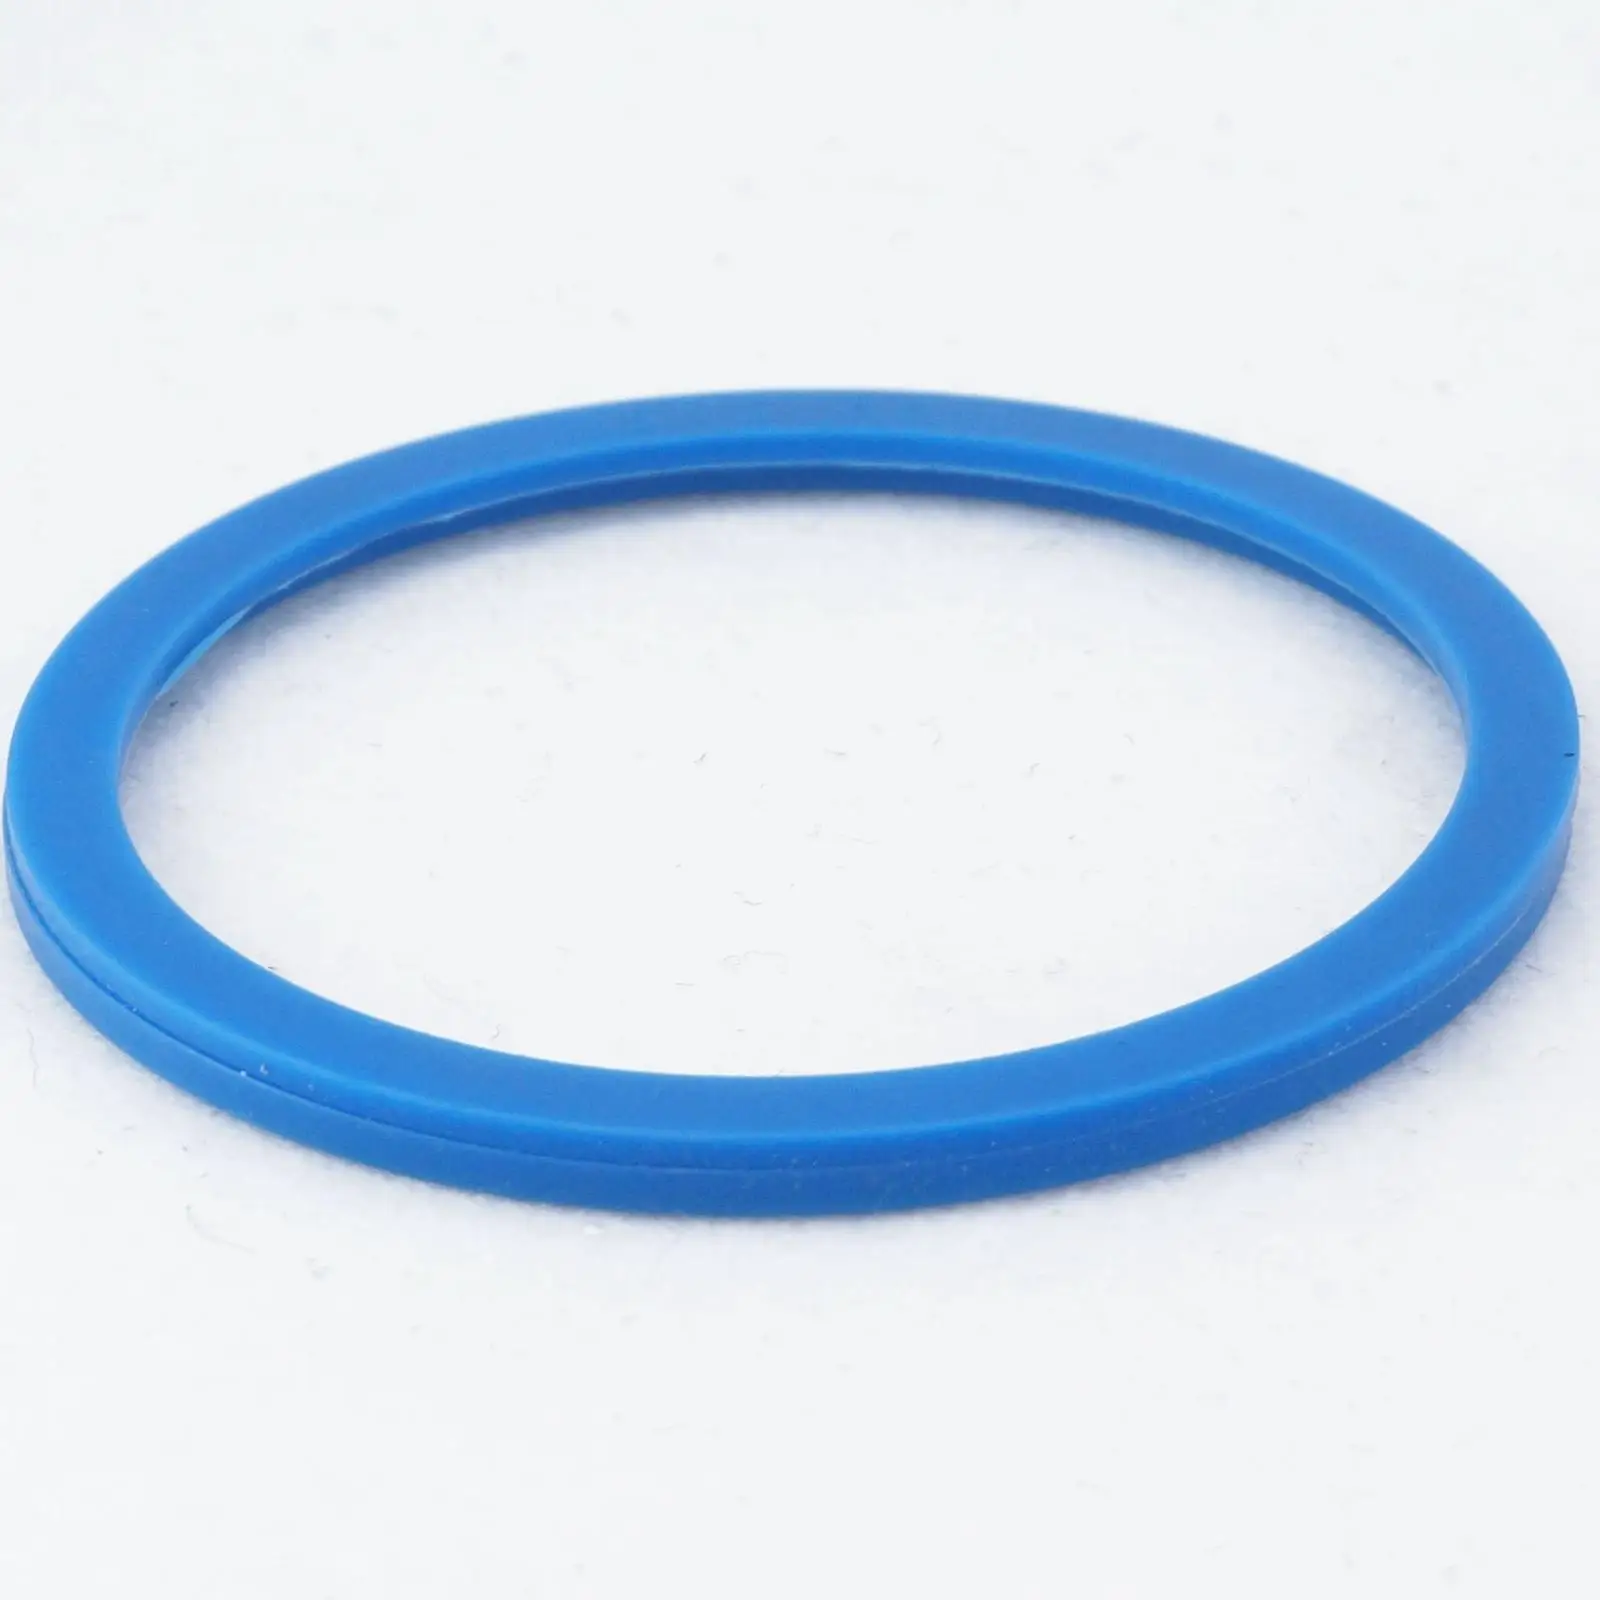 LOT 5 Multiple Blue Silicone Flat Gasket Ring for Sanitary SMS Socket Union 